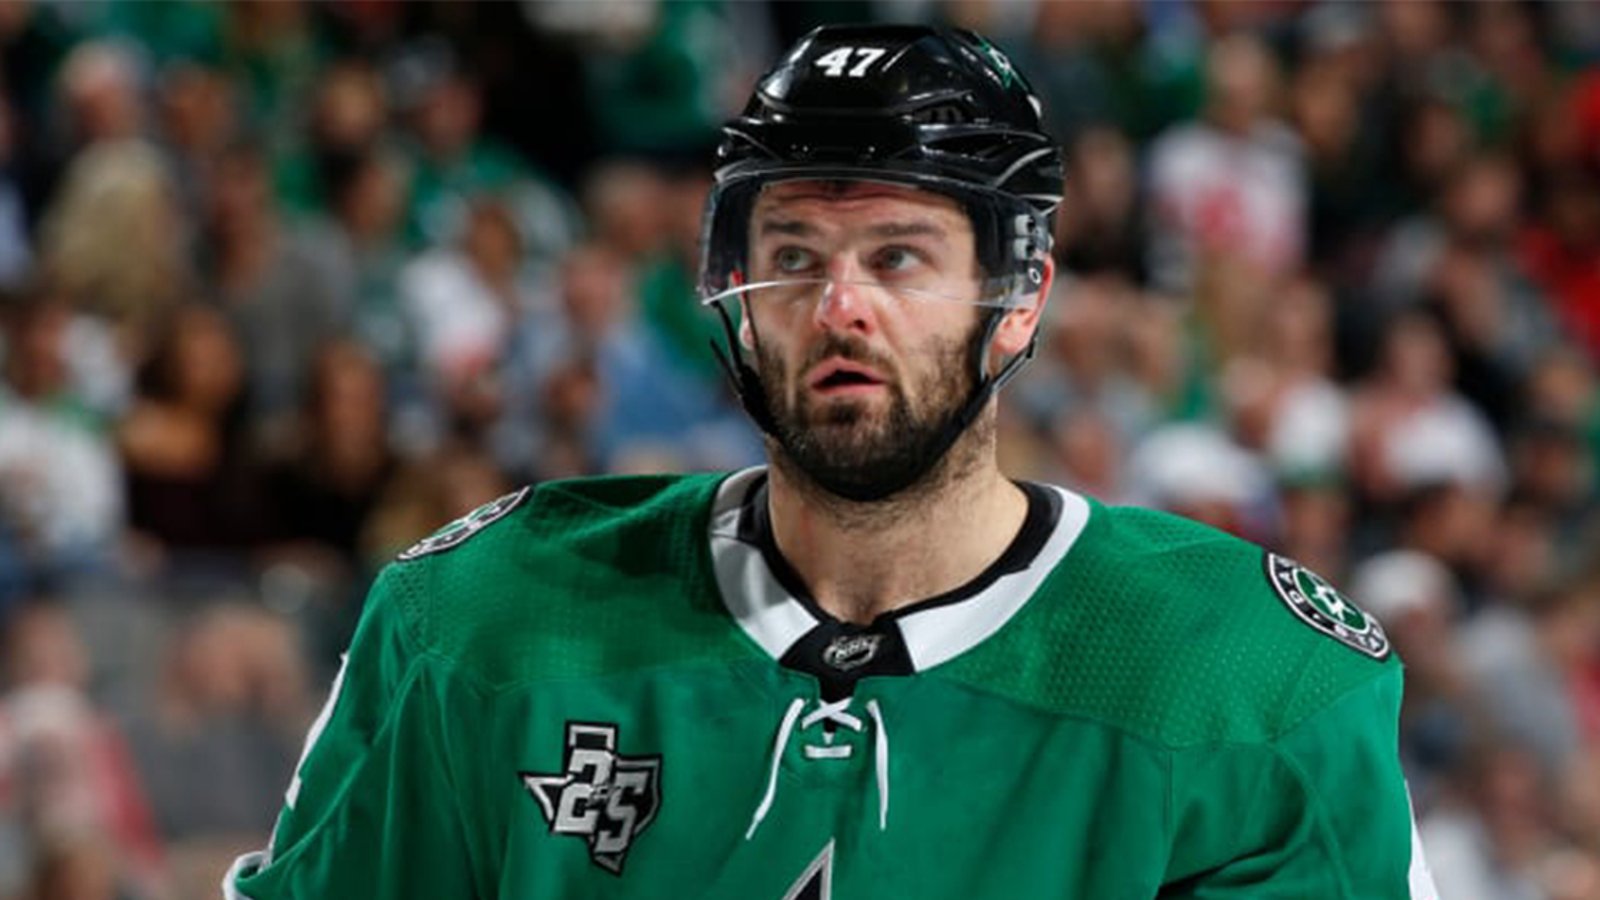 Radulov’s coronavirus test results finally revealed after many days without an update on his health 